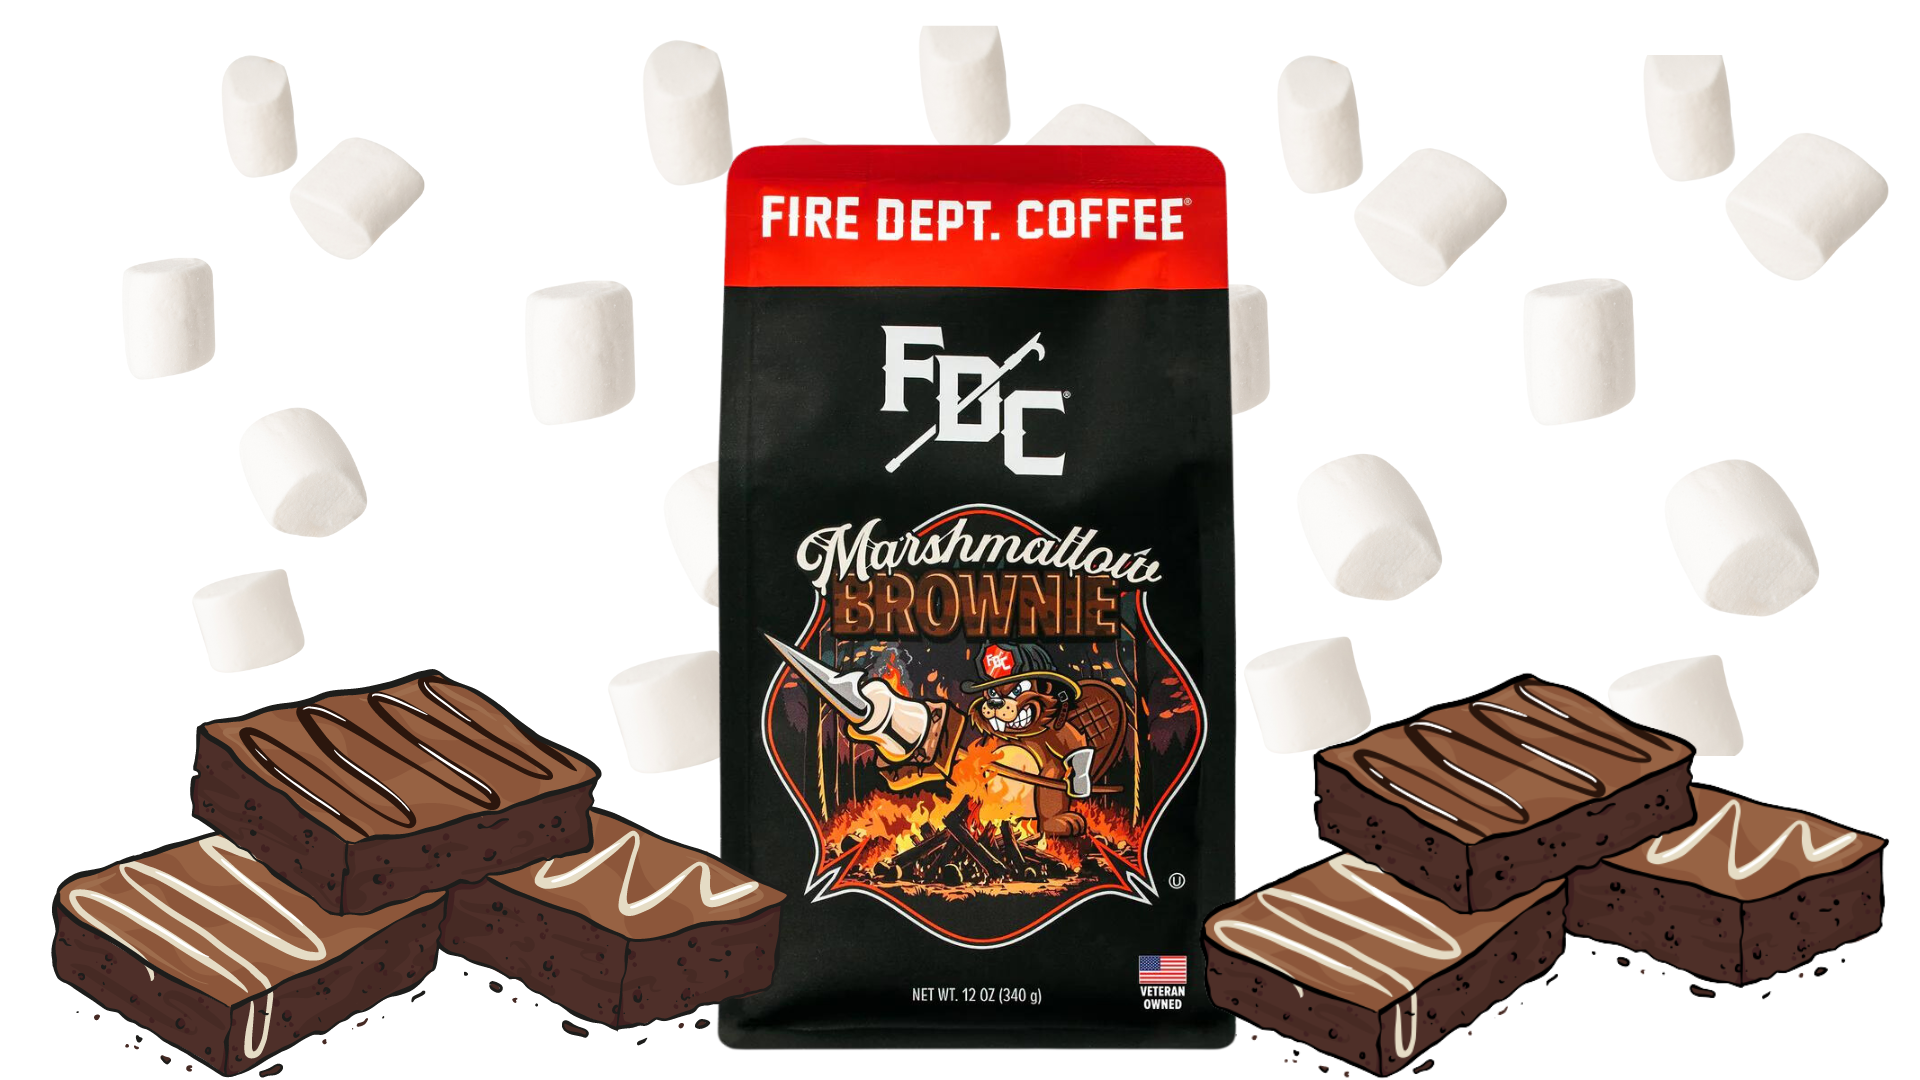 fire dept coffee, marshmallow brownie